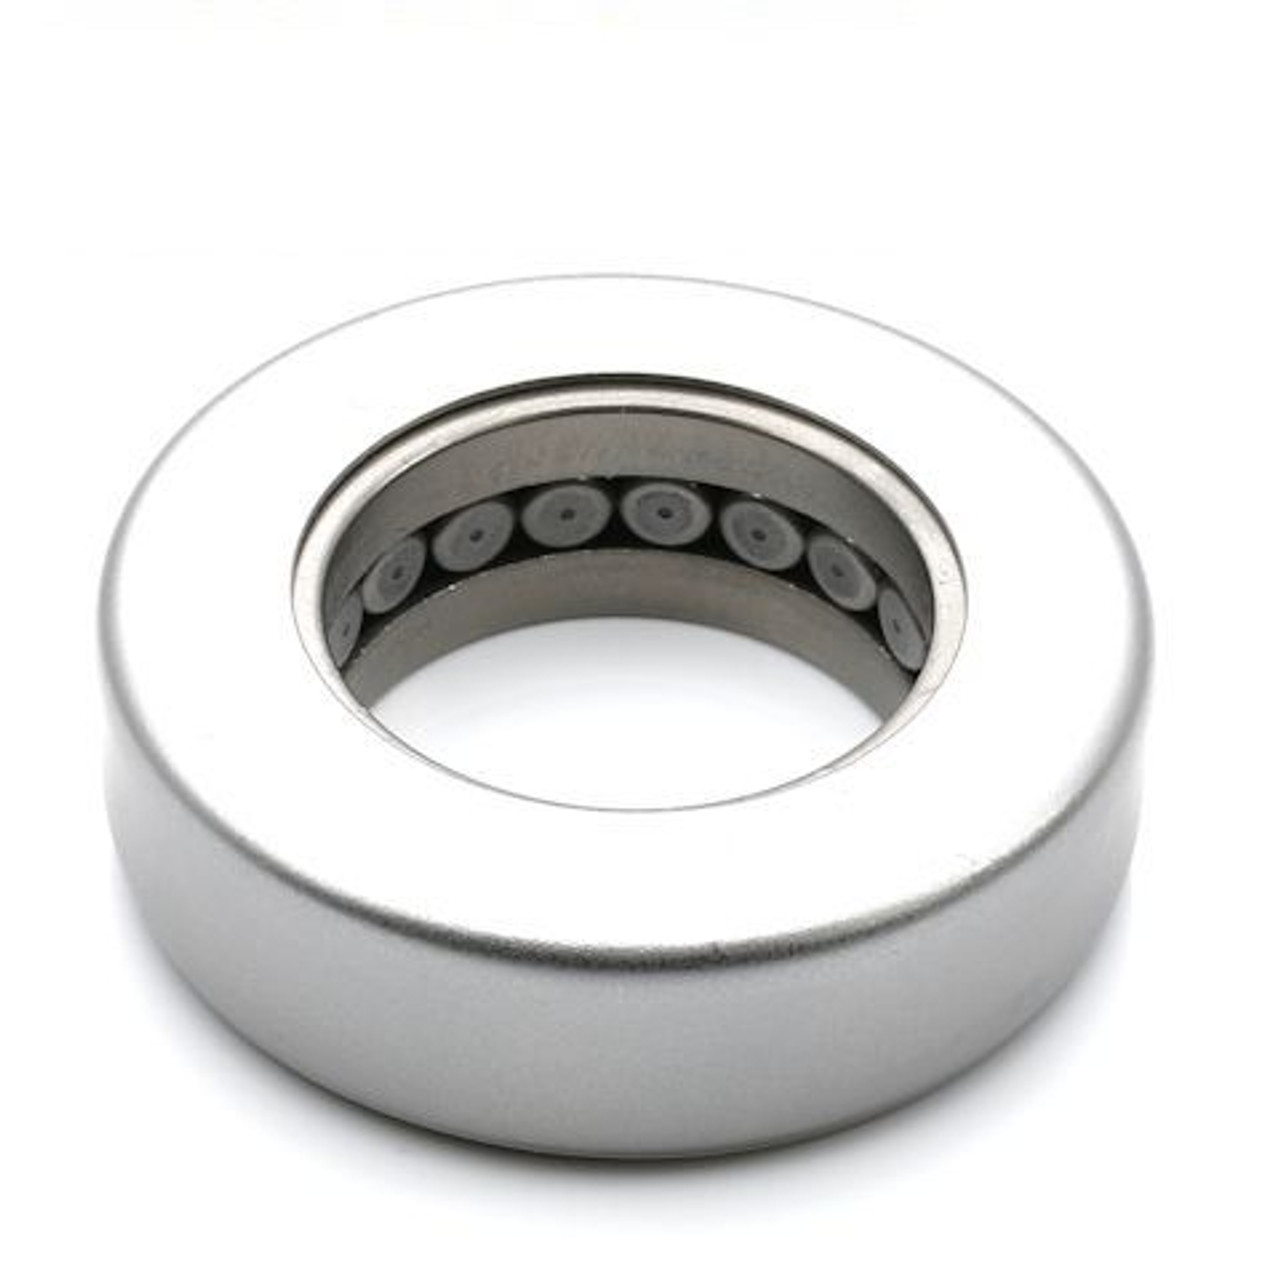 Timken® Stamped Race Thrust Bearing  T189-904A3